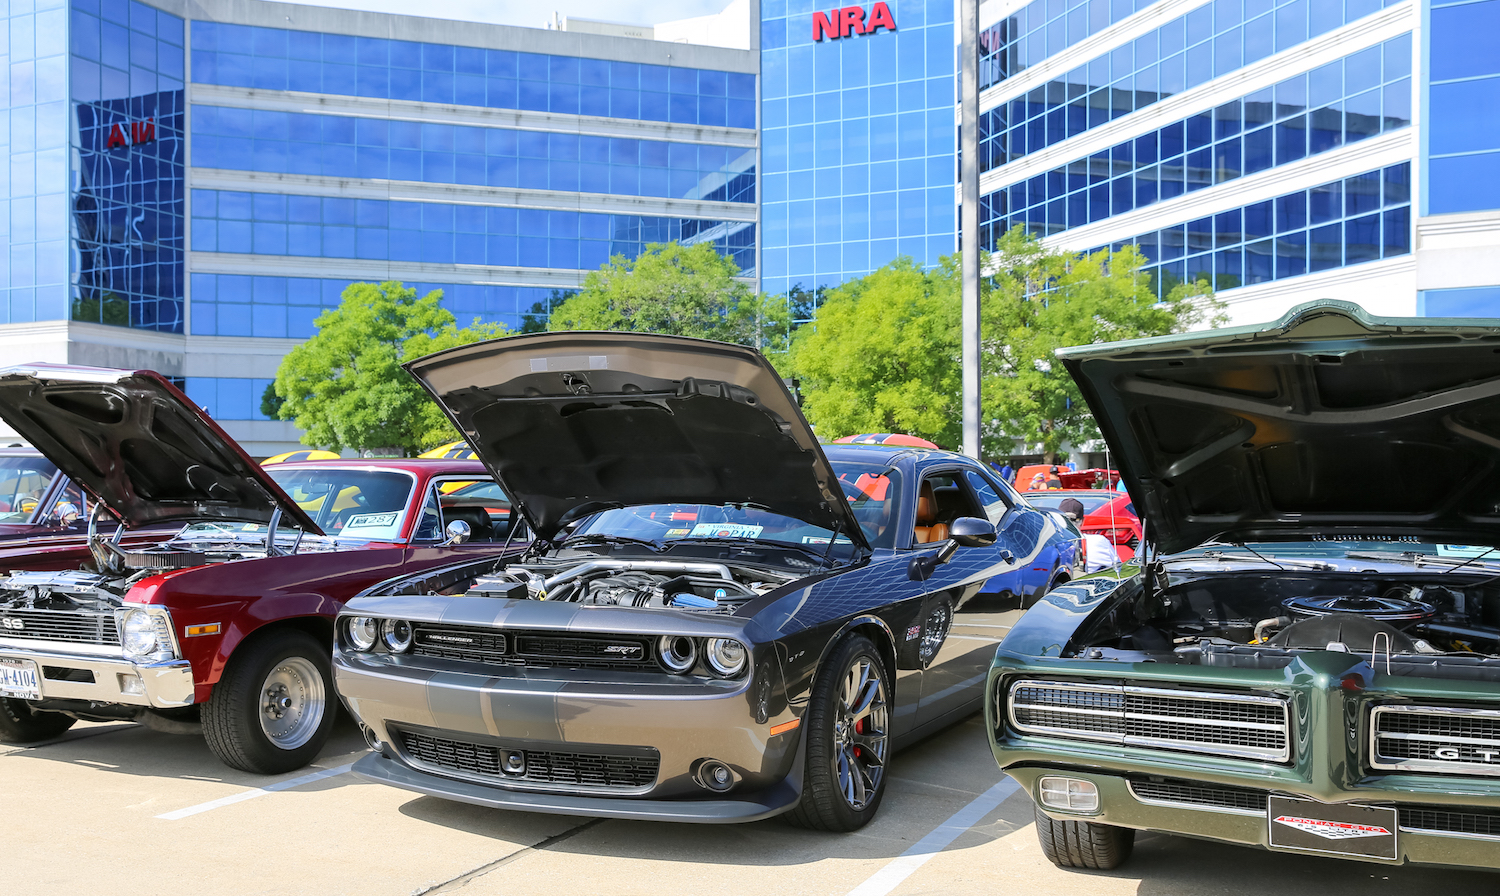 NRA Car & Truck Show Returns For Fourth Year in Fairfax Sept. 23